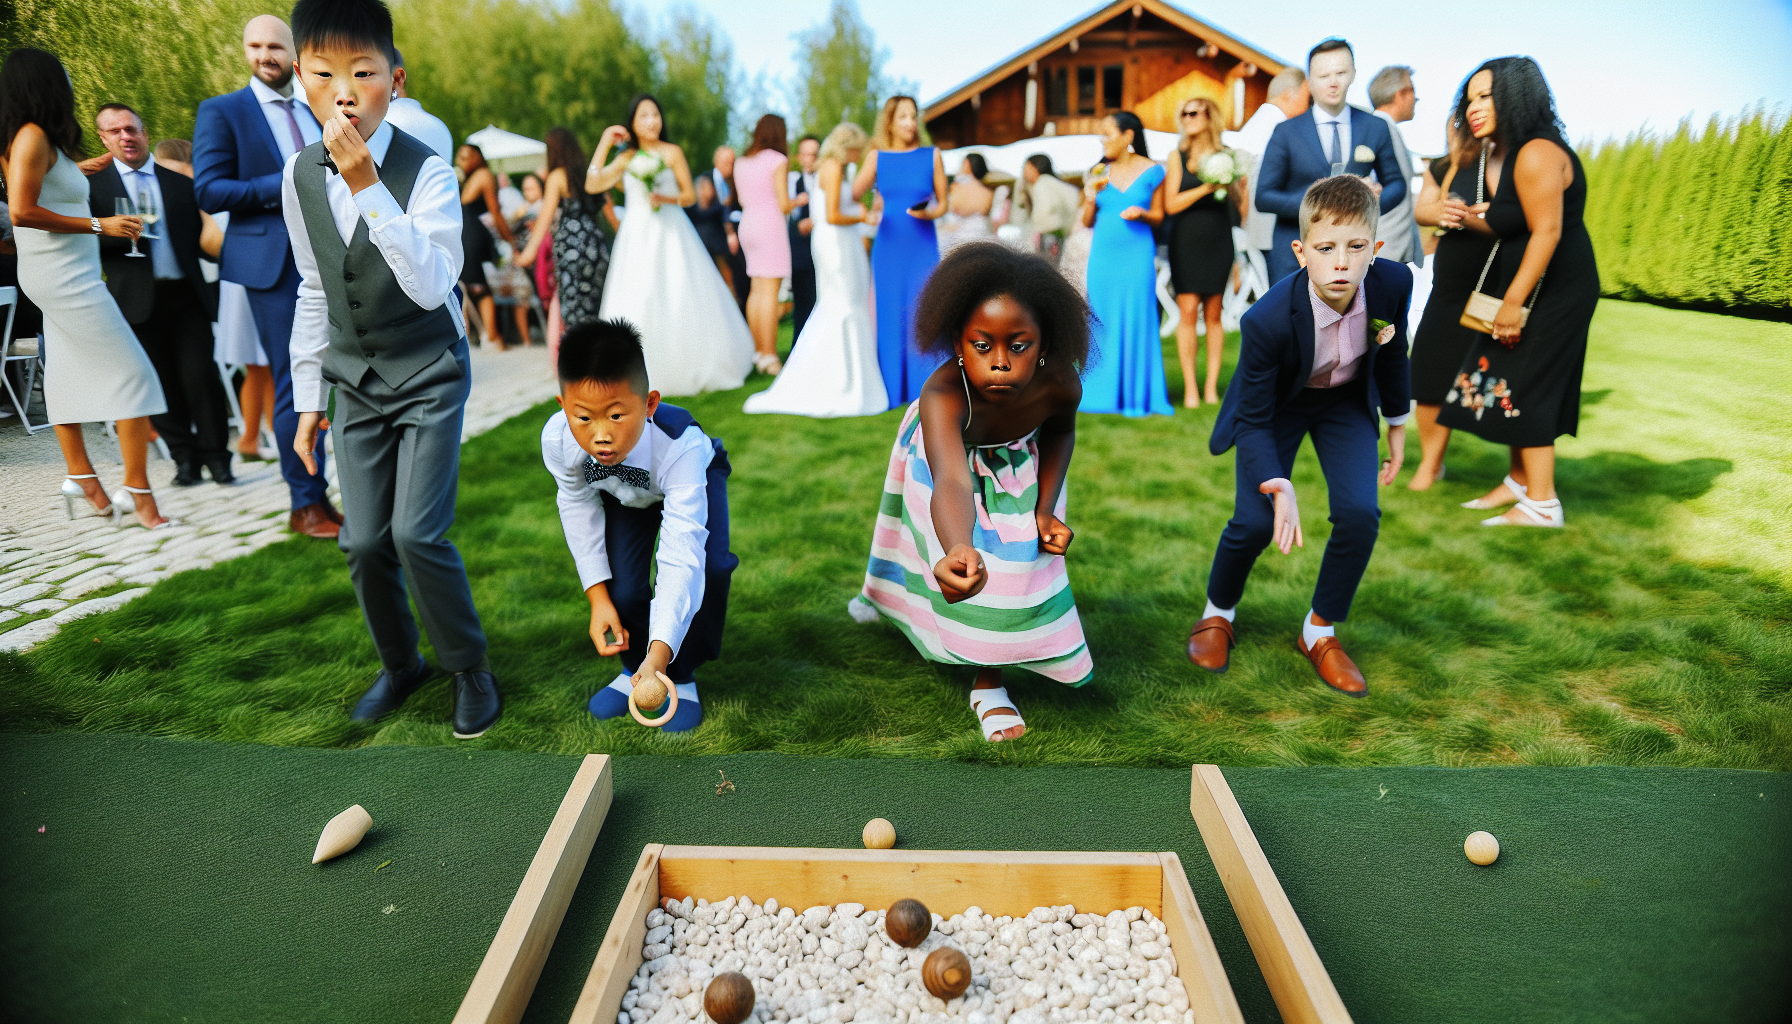 Children playing outdoor lawn games at a wedding